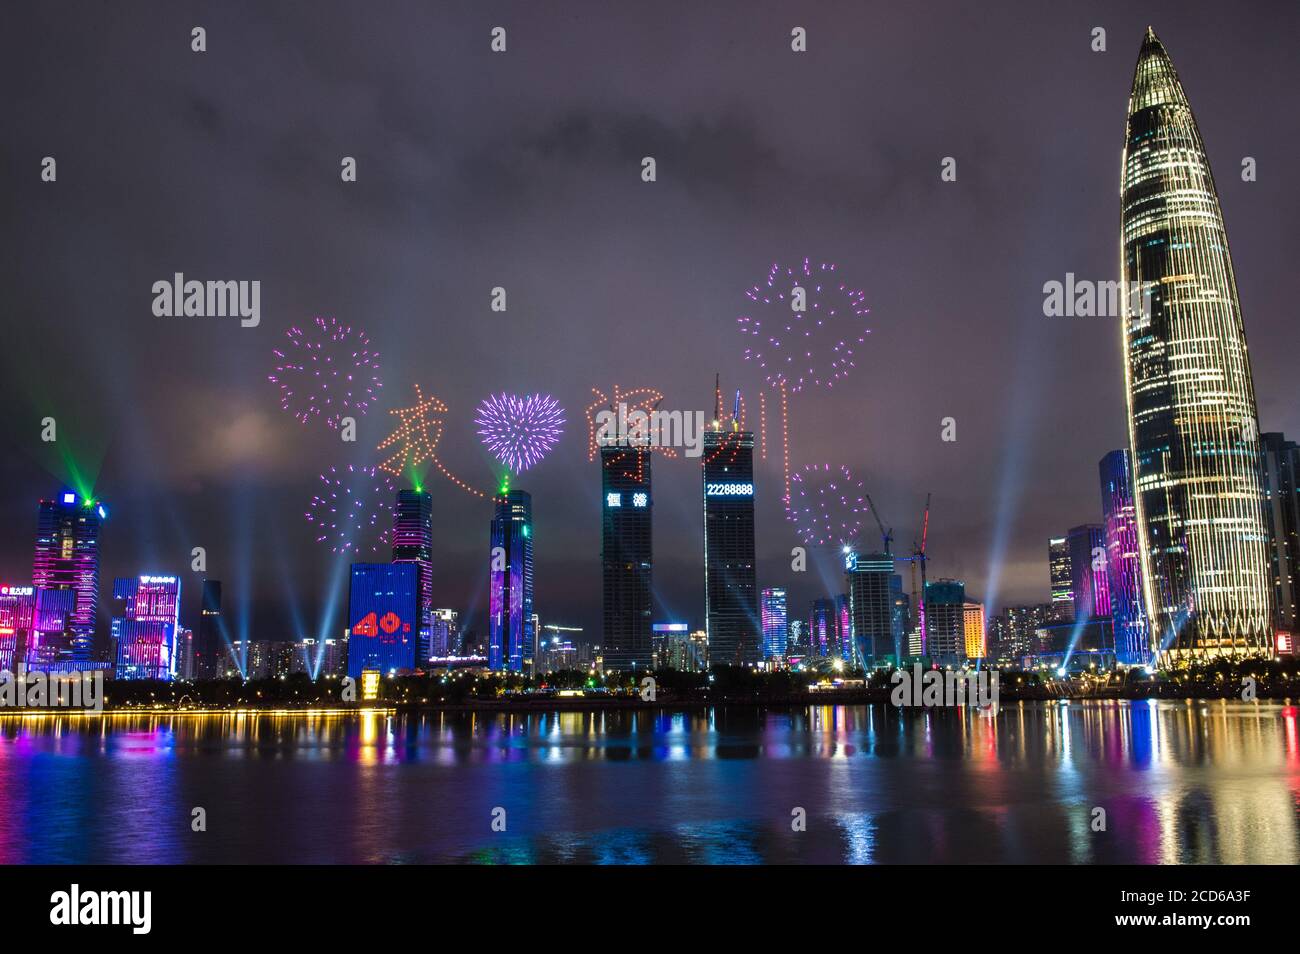 Beijing, China. 26th Aug, 2020. Photo taken on Aug. 26, 2020 shows a light show in Shenzhen, south China's Guangdong Province. A light show performed with 826 drones combined with city lights started at 08:26 p.m. local time on Aug. 26 in Shenzhen to celebrate the 40th anniversary of the establishment of the Shenzhen Special Economic Zone (SEZ). Credit: Mao Siqian/Xinhua/Alamy Live News Stock Photo